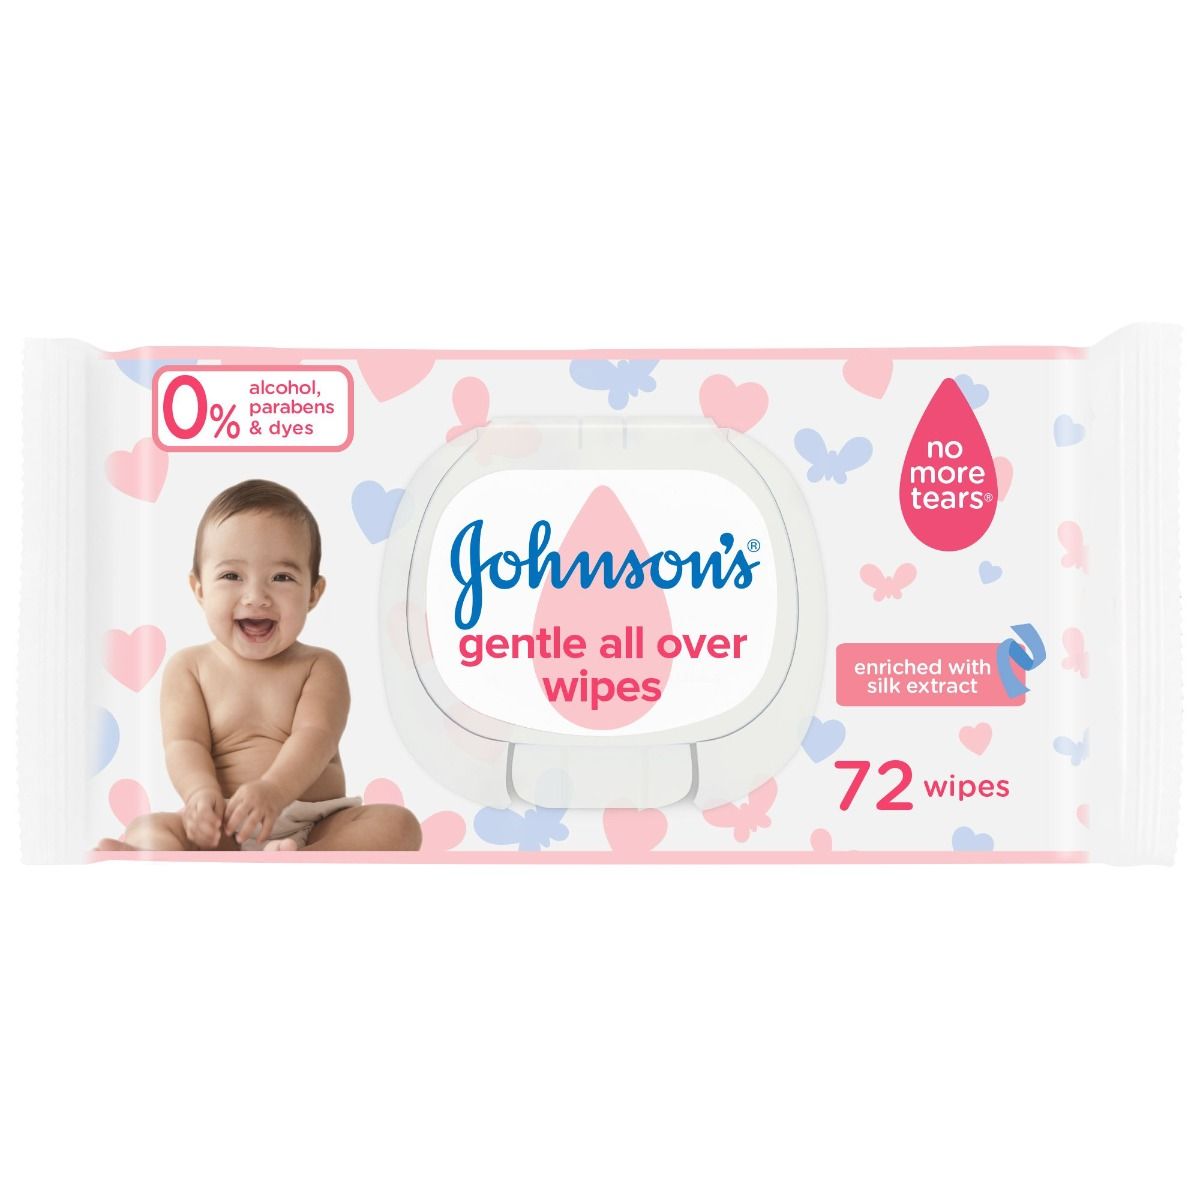 JOHNSONS BABY WIPES GENTLE ALL OVER 72PC BASIC